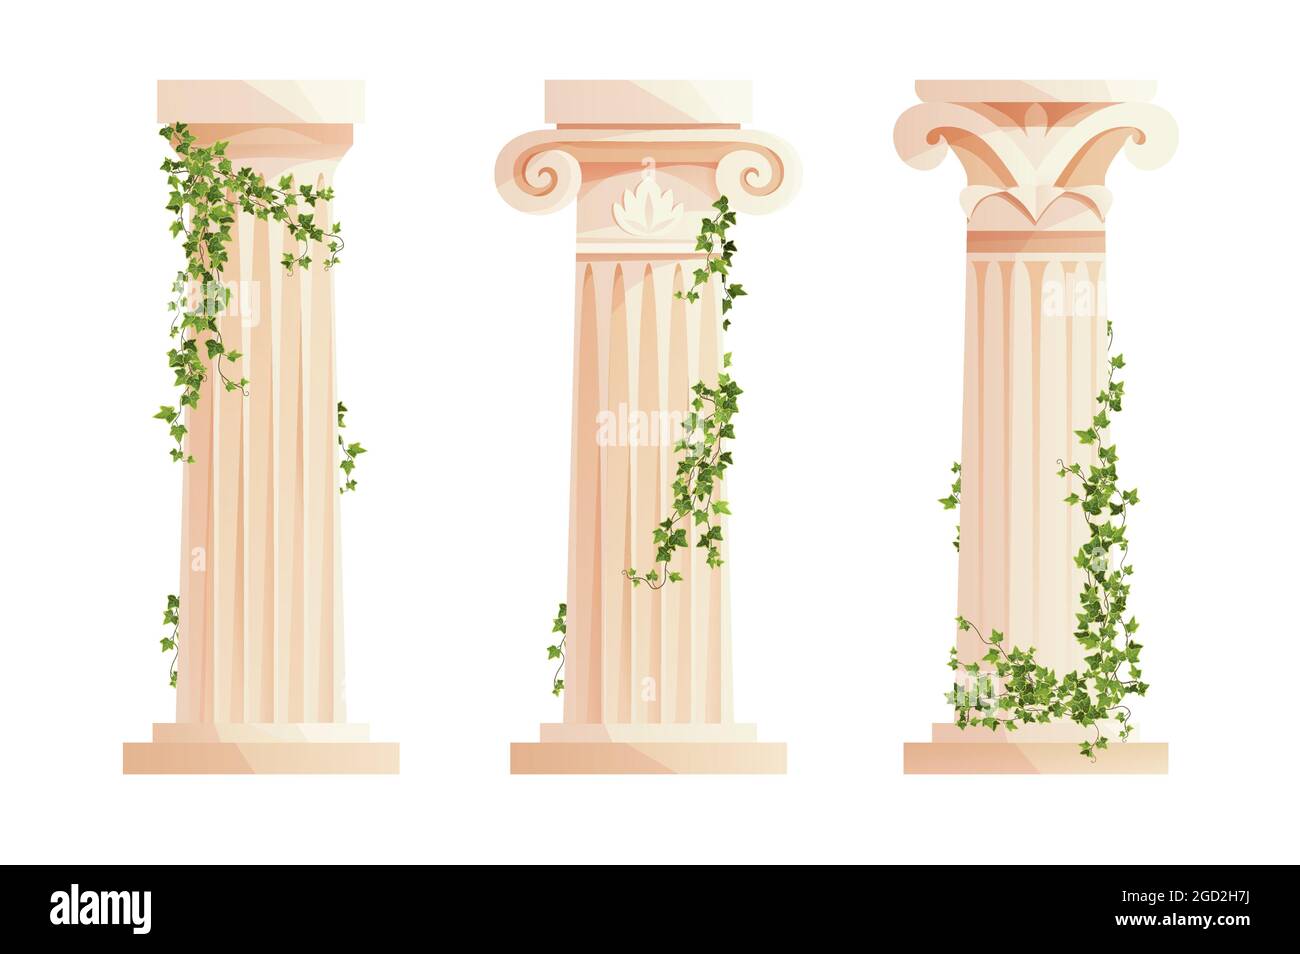 Pillar design Cut Out Stock Images & Pictures - Alamy